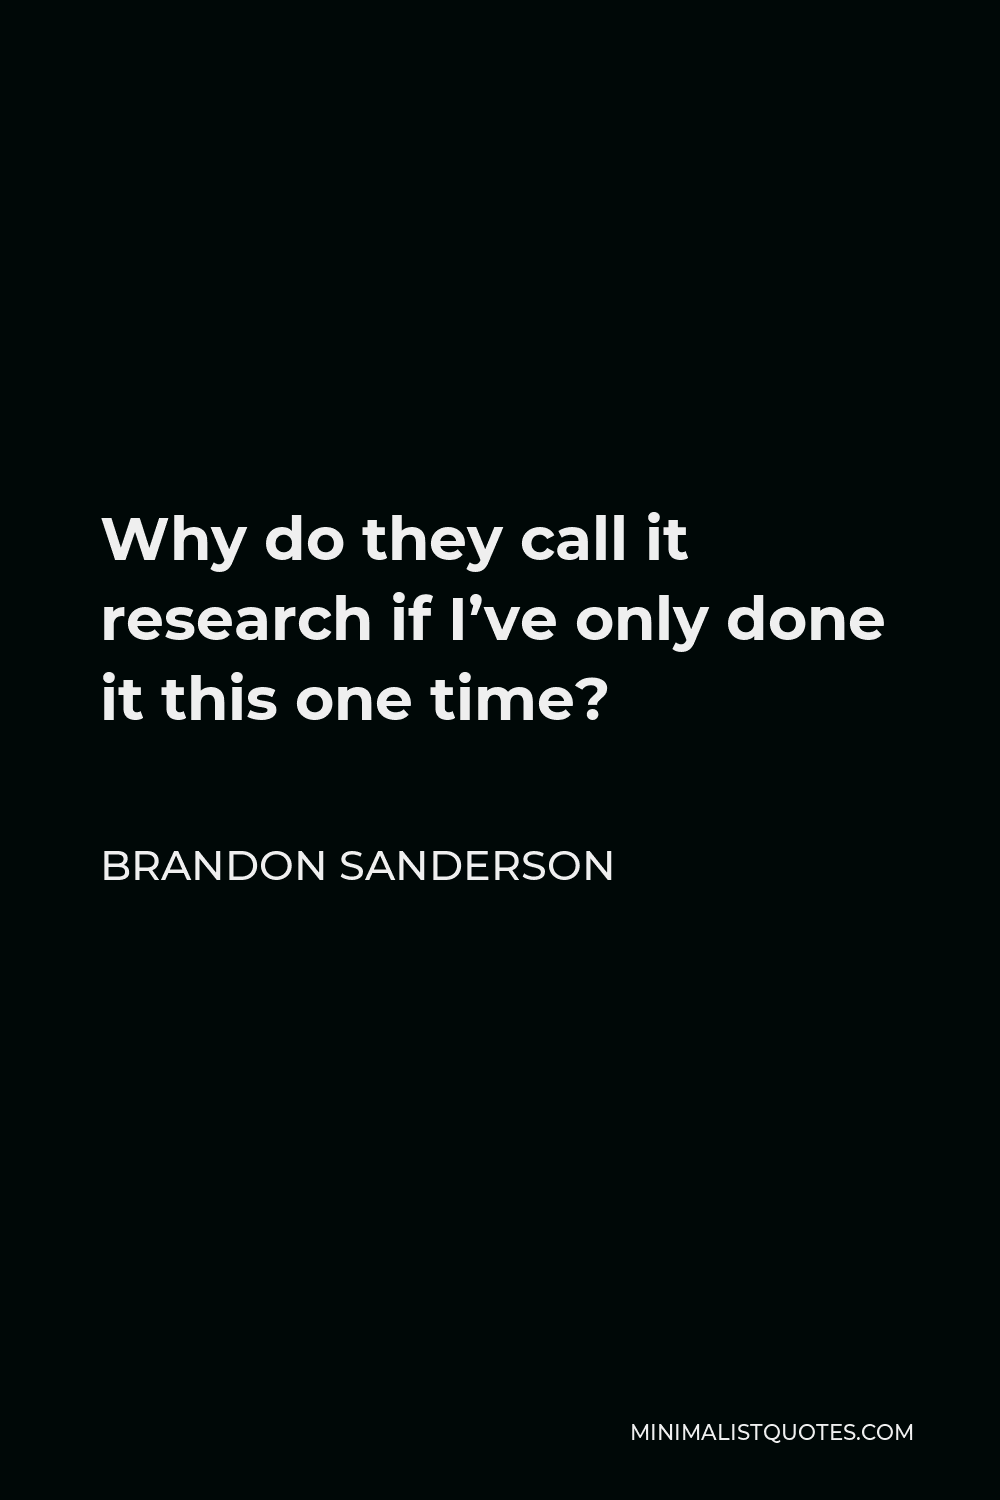 Brandon Sanderson Quote - Why do they call it research if I’ve only done it this one time?